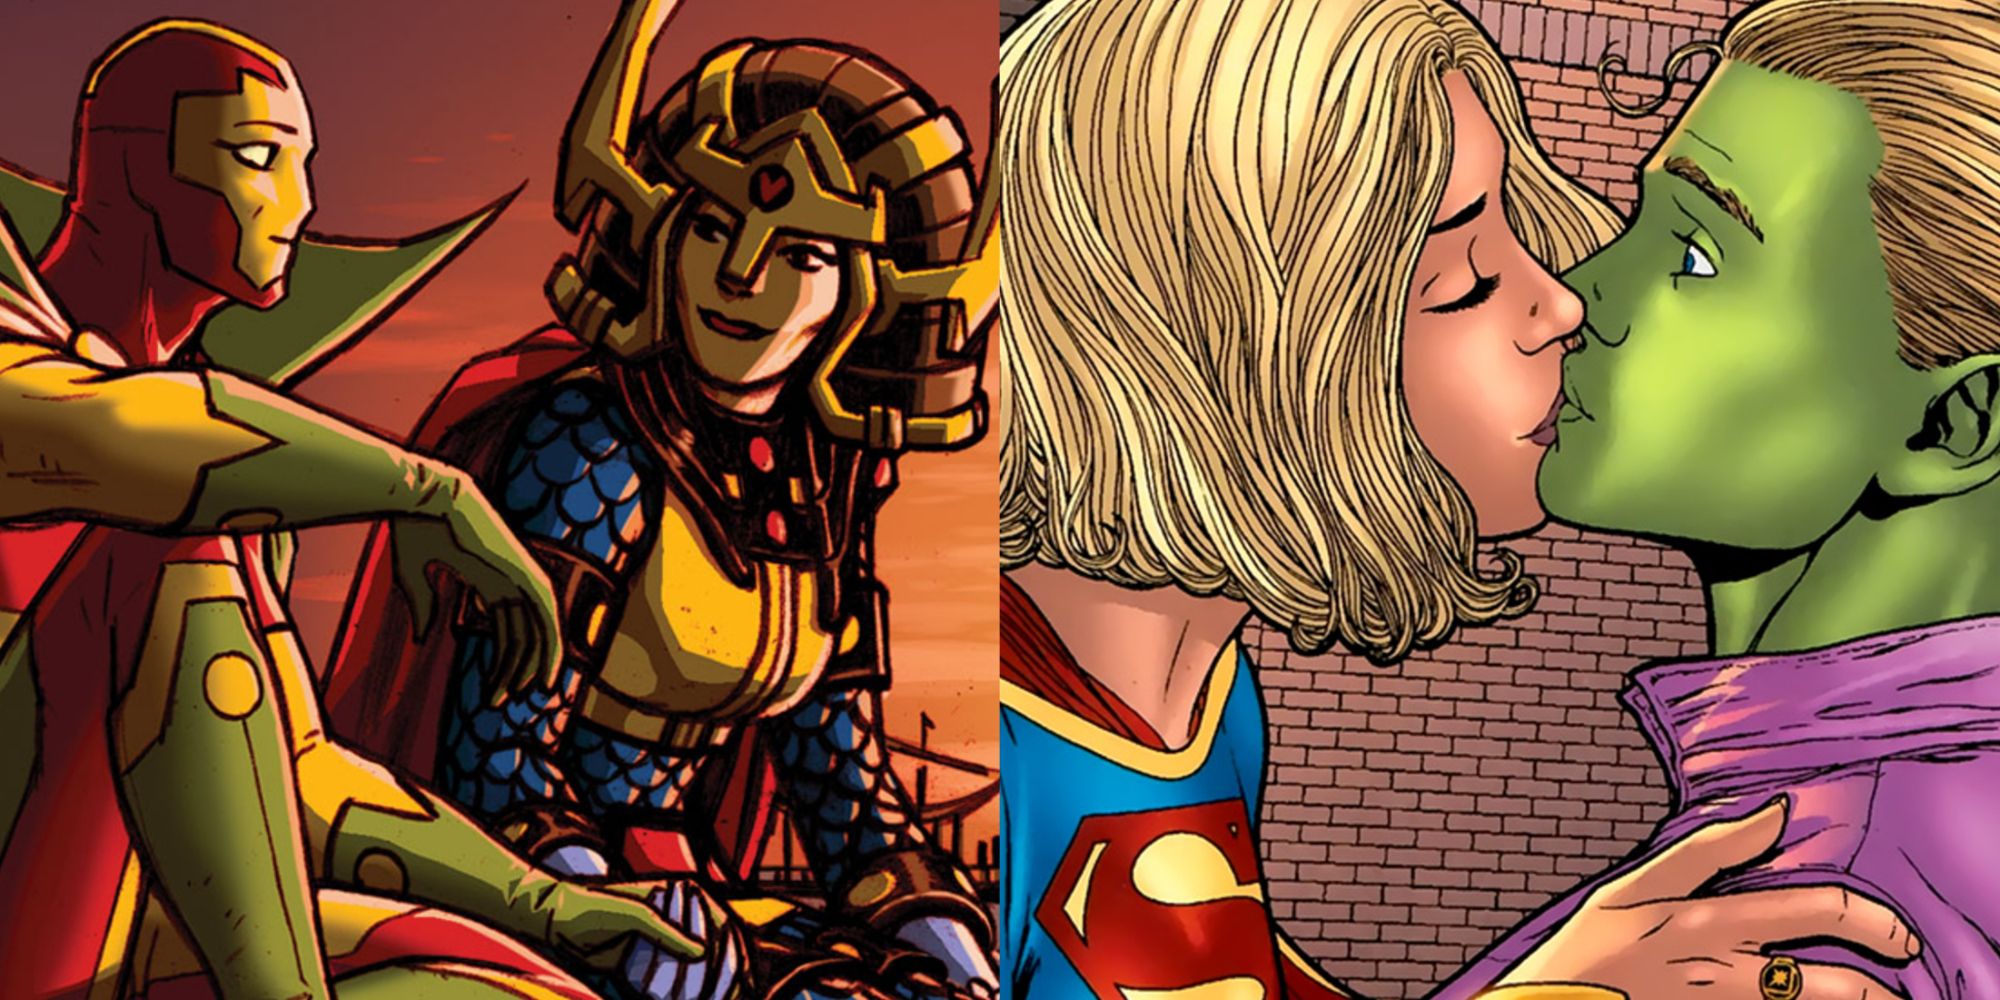 Split image of Mr. Miracle with Big Barda and Supergirl with Brainiac 5 in DC Comics